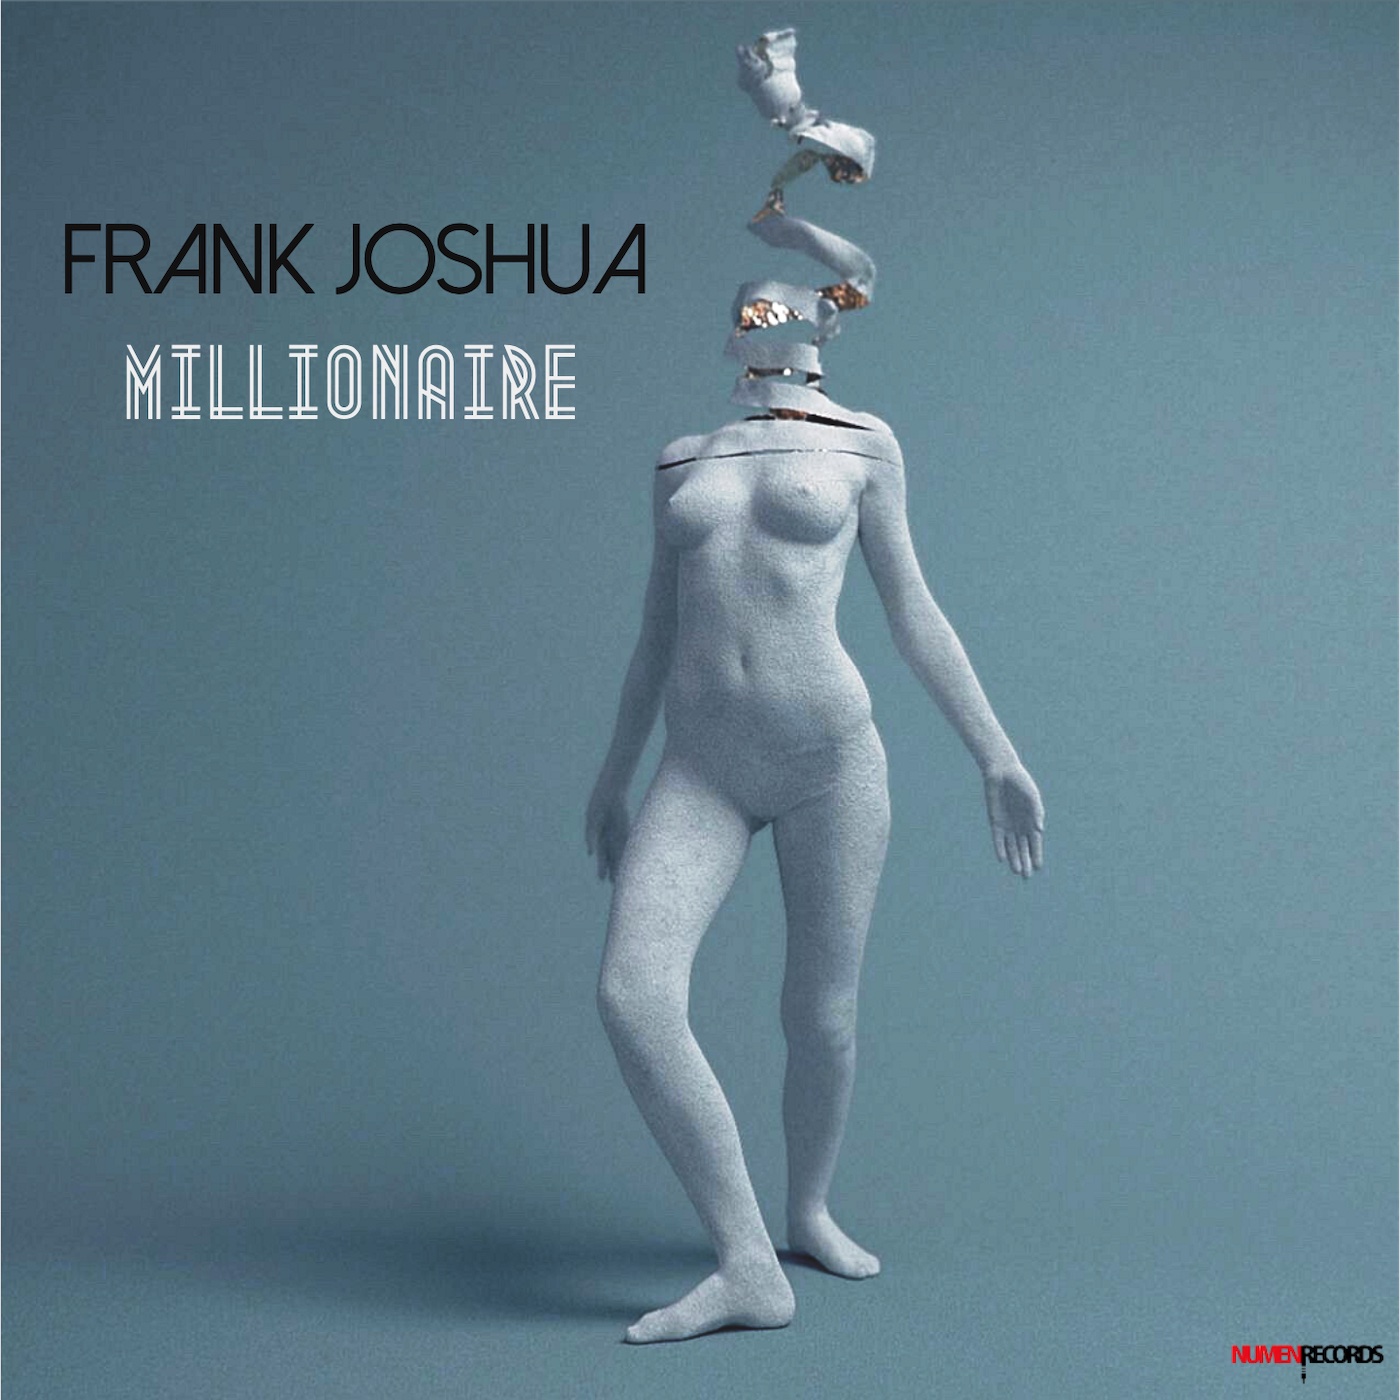 Frank Joshua touches the sensual and forbidden in “Millionaire”